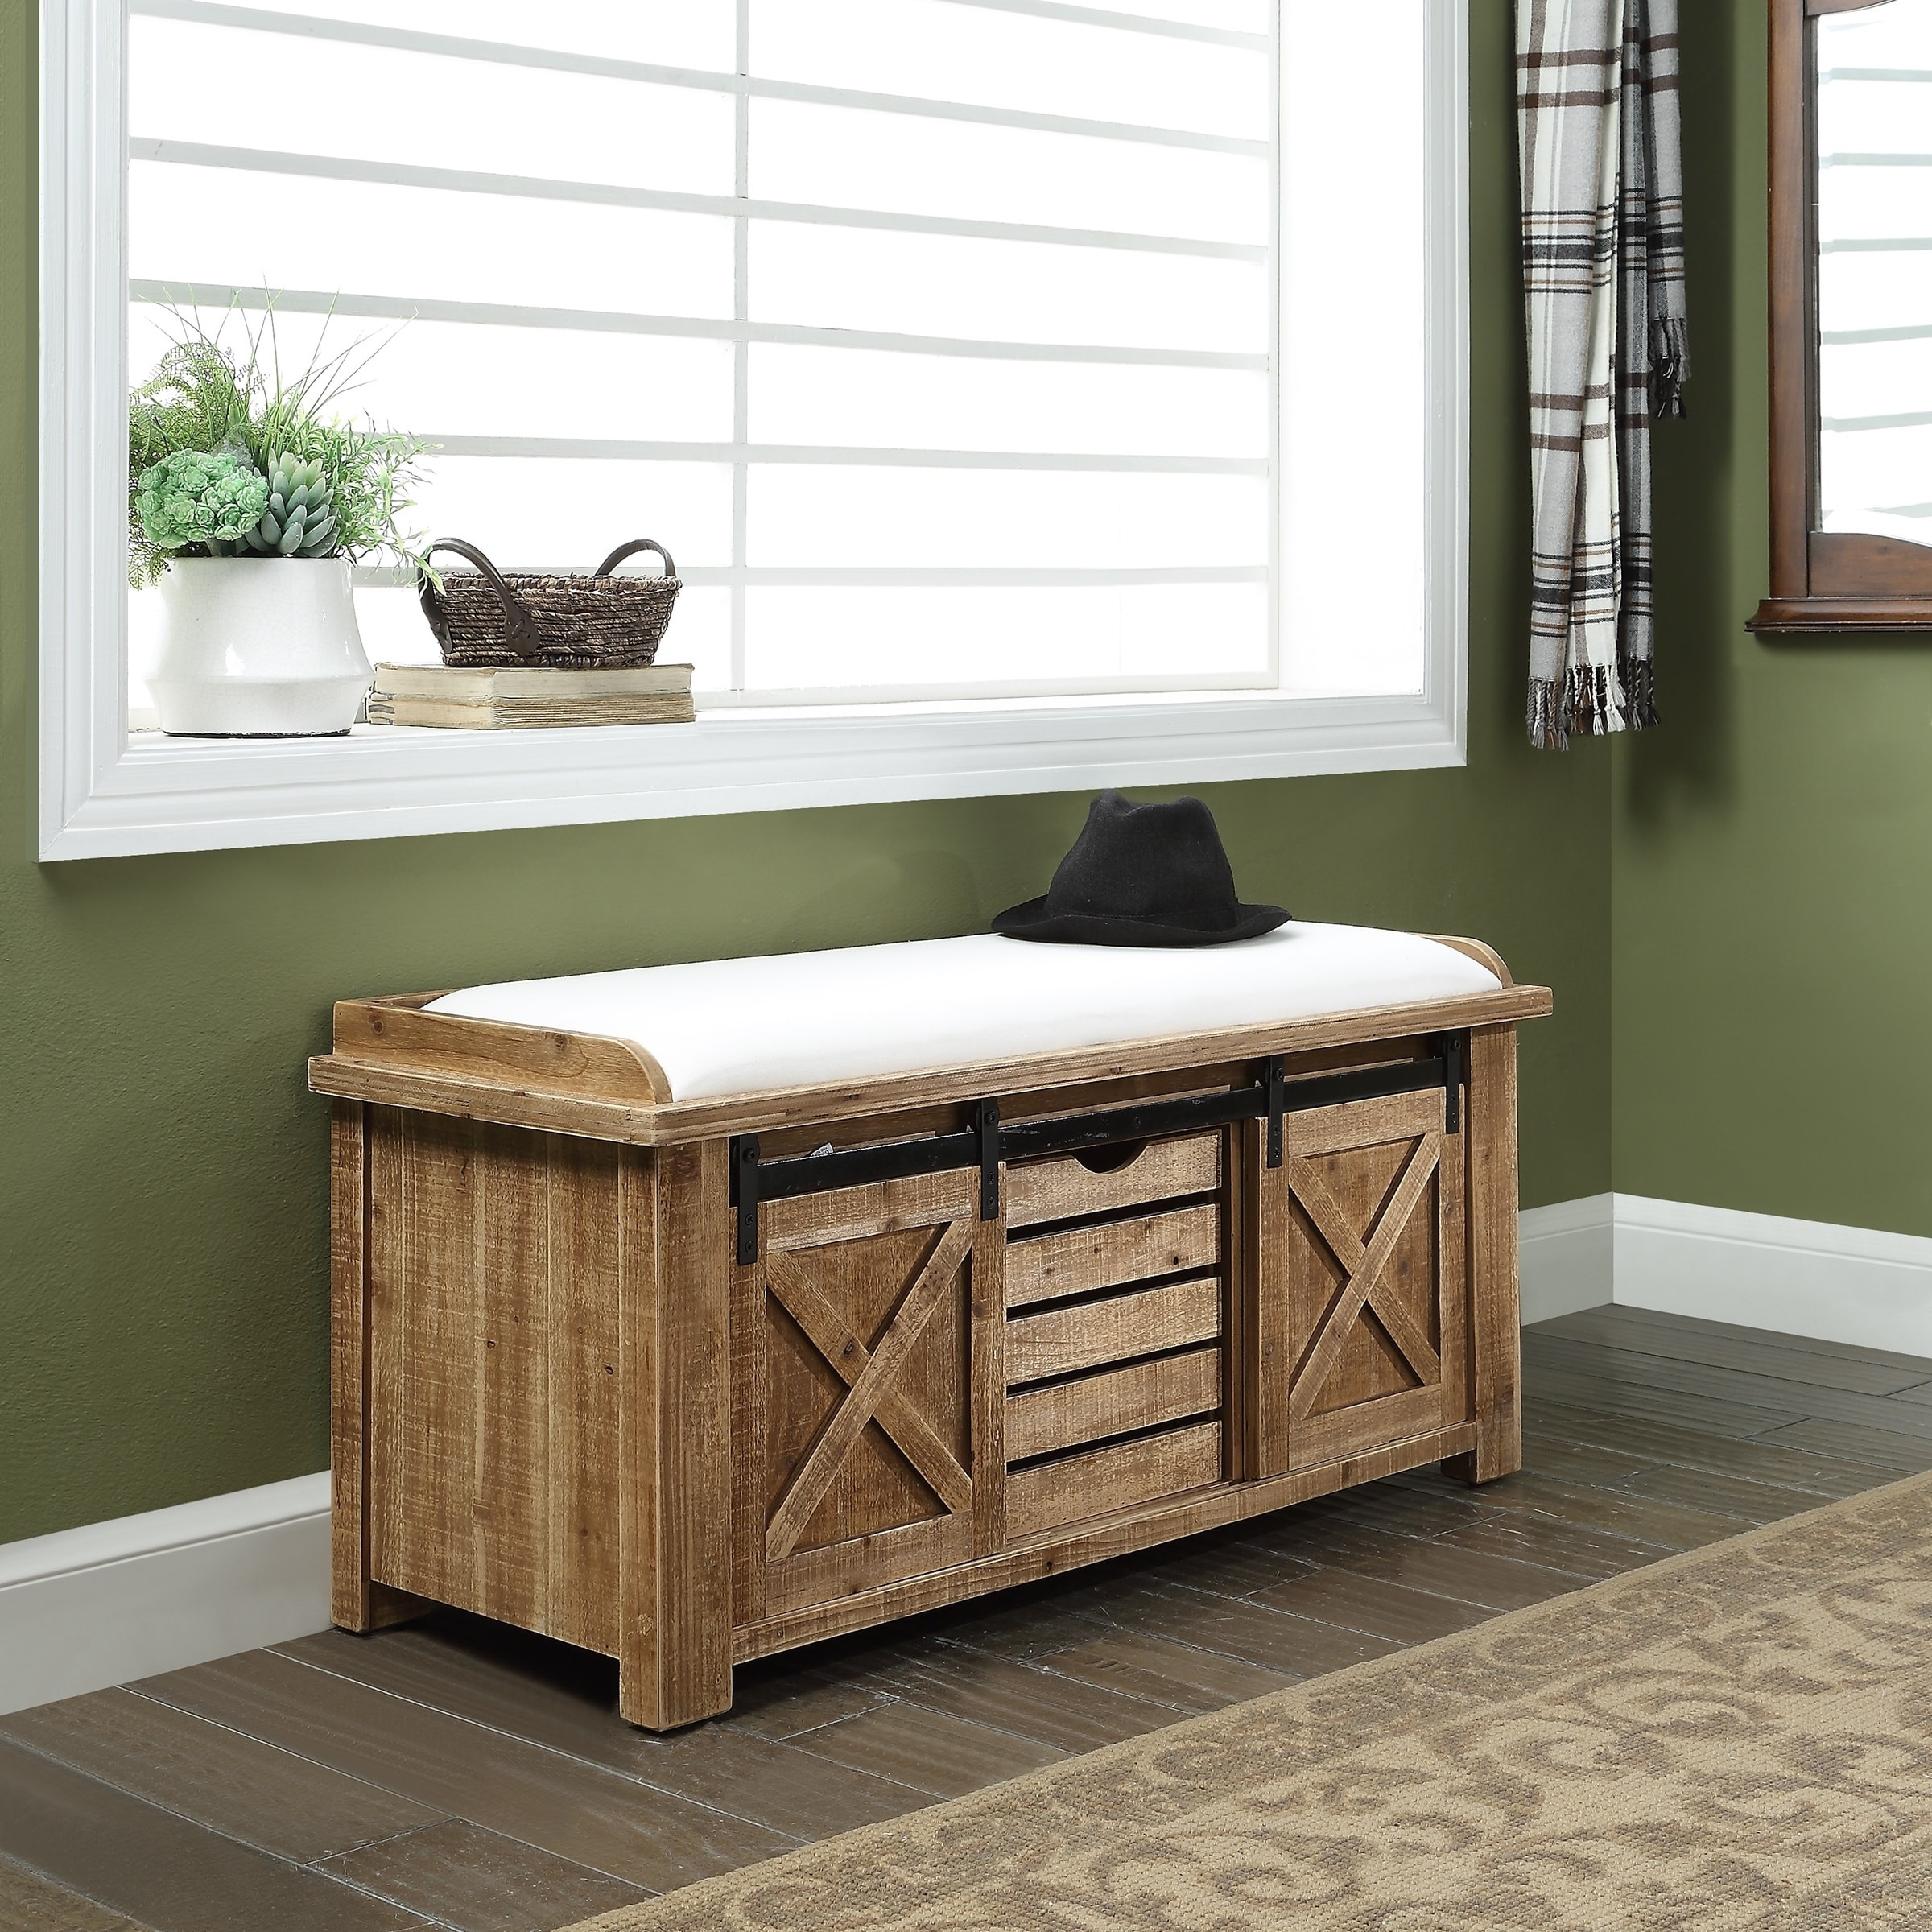 Farmhouse Bench With Storage
 Storage Bench Sliding Rustic Barn Doors Home Furniture